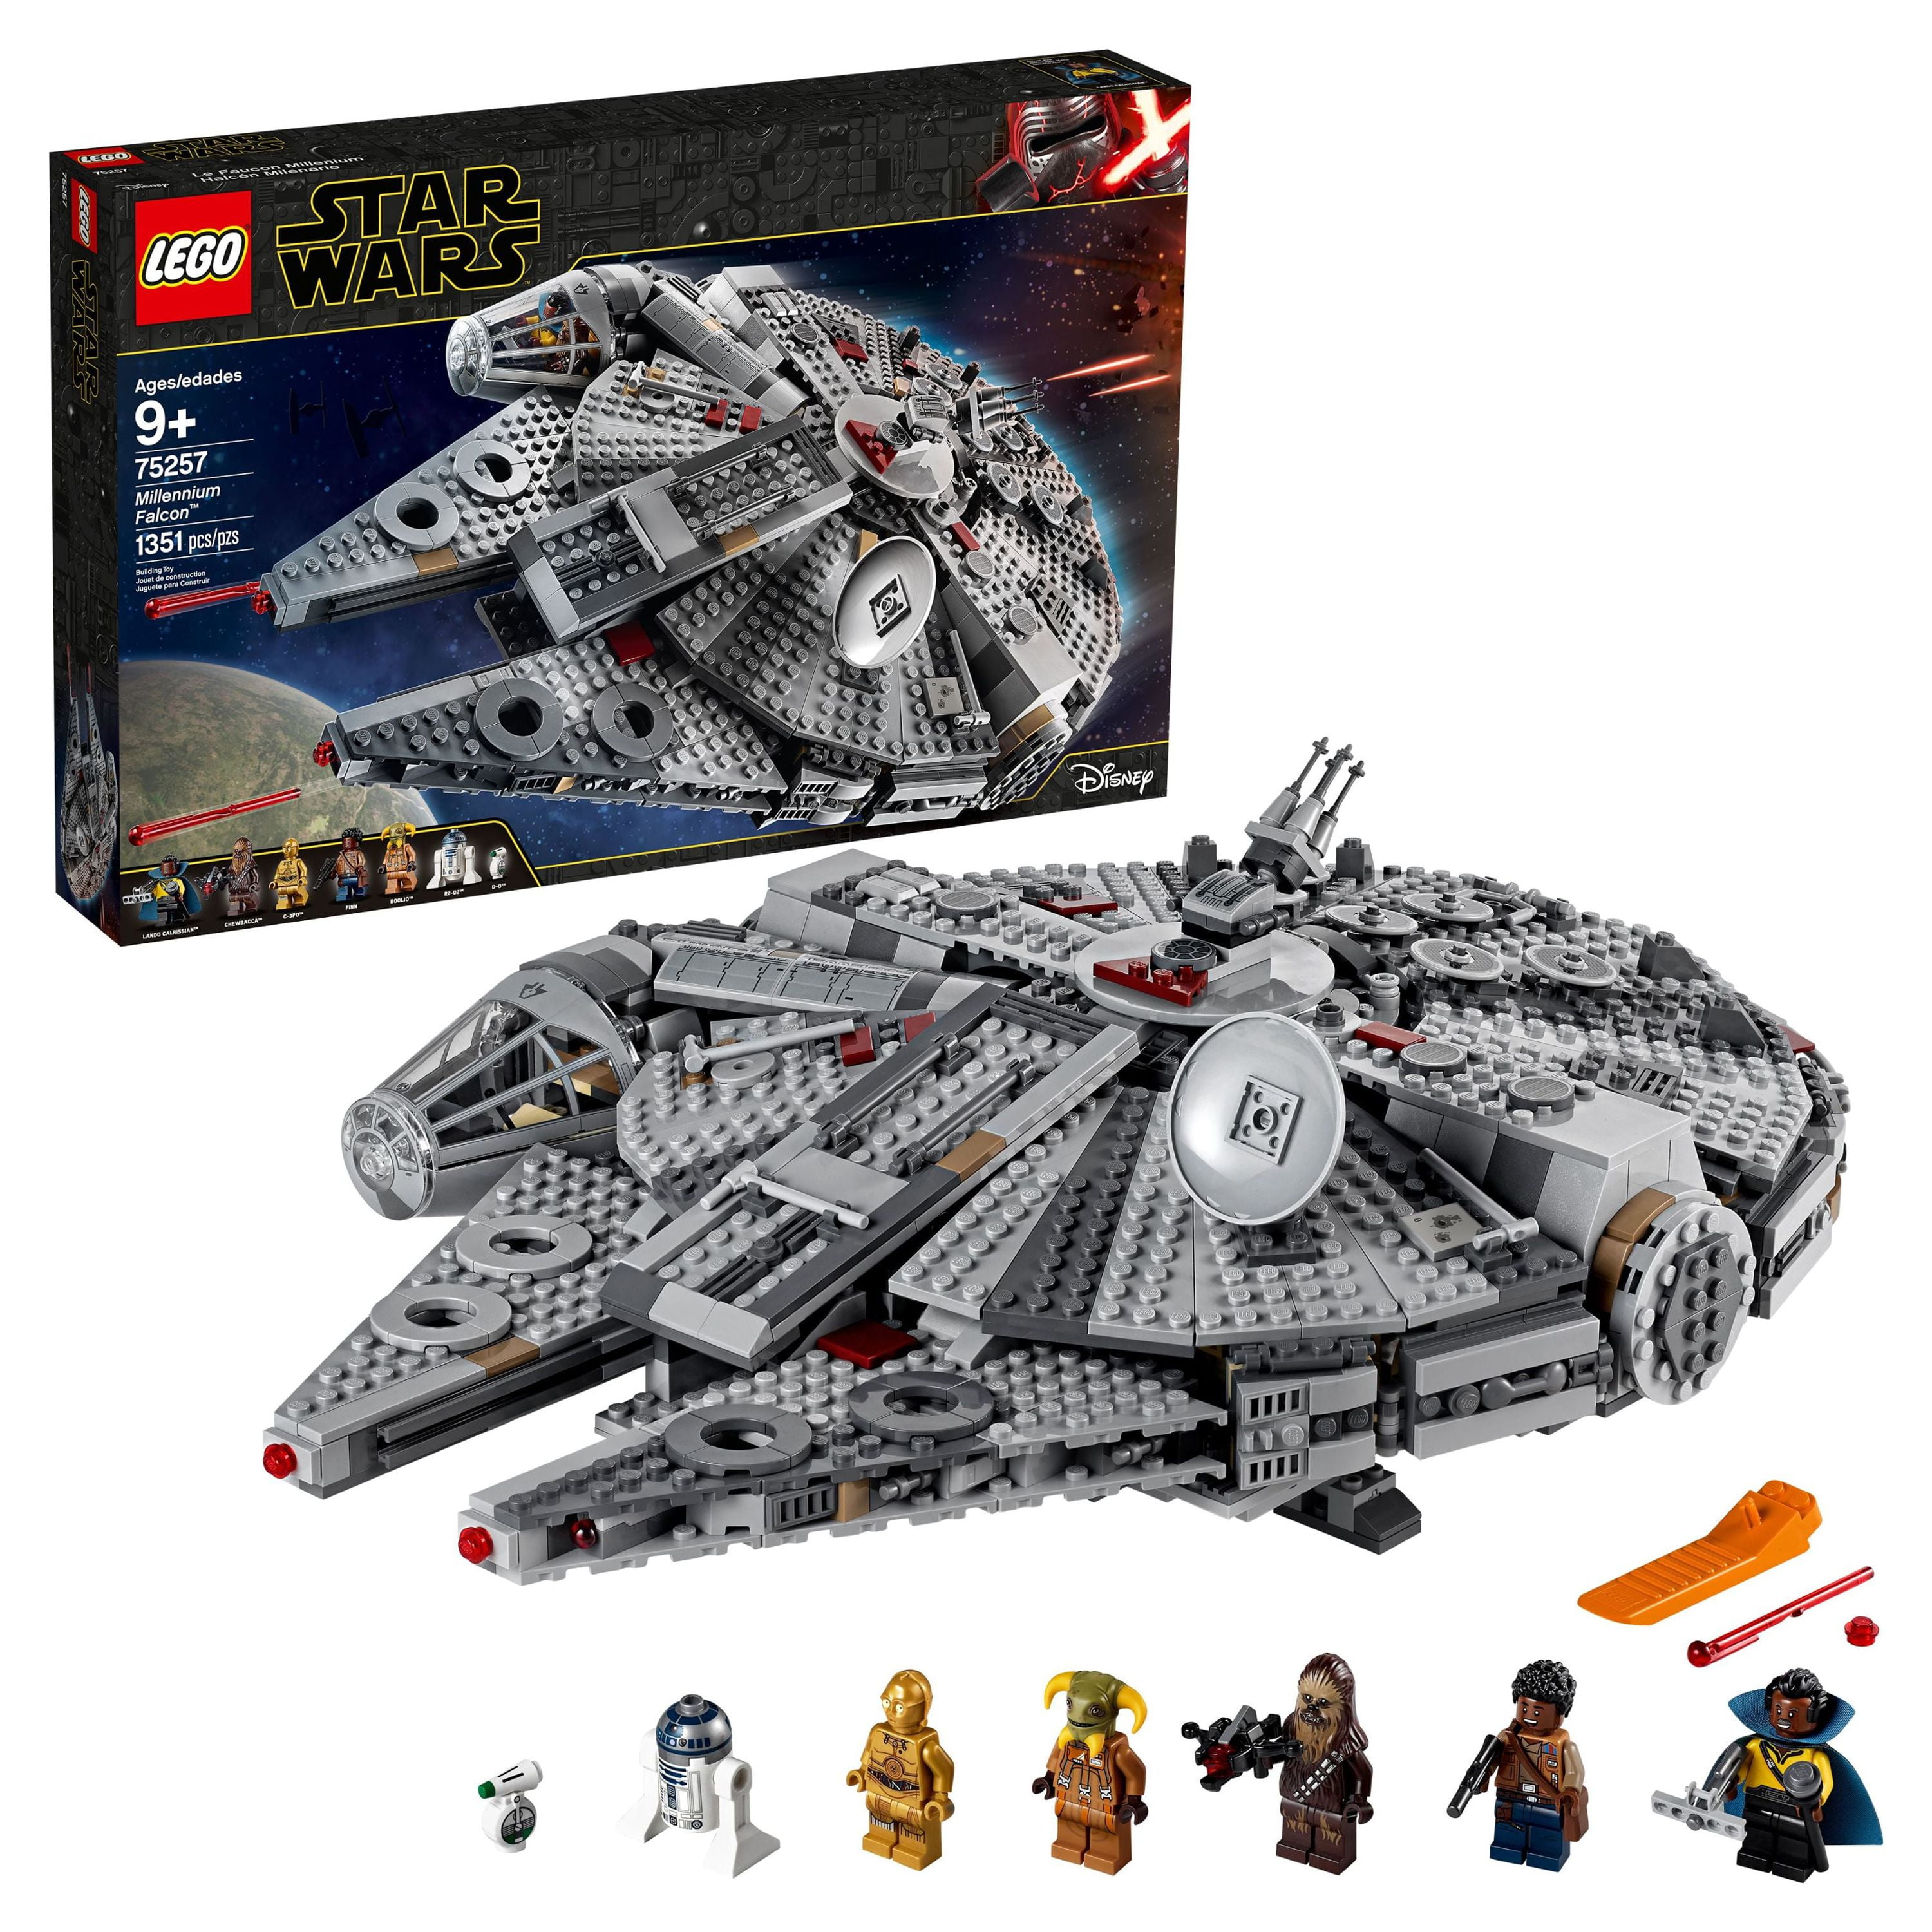 LEGO Star Wars Millennium Falcon 75257 Building Set Starship Model with  Finn, Chewbacca, Lando Calrissian, Boolio, C-3PO, R2-D2, and D-O  Minifigures, The Rise of Skywalker Movie Collection